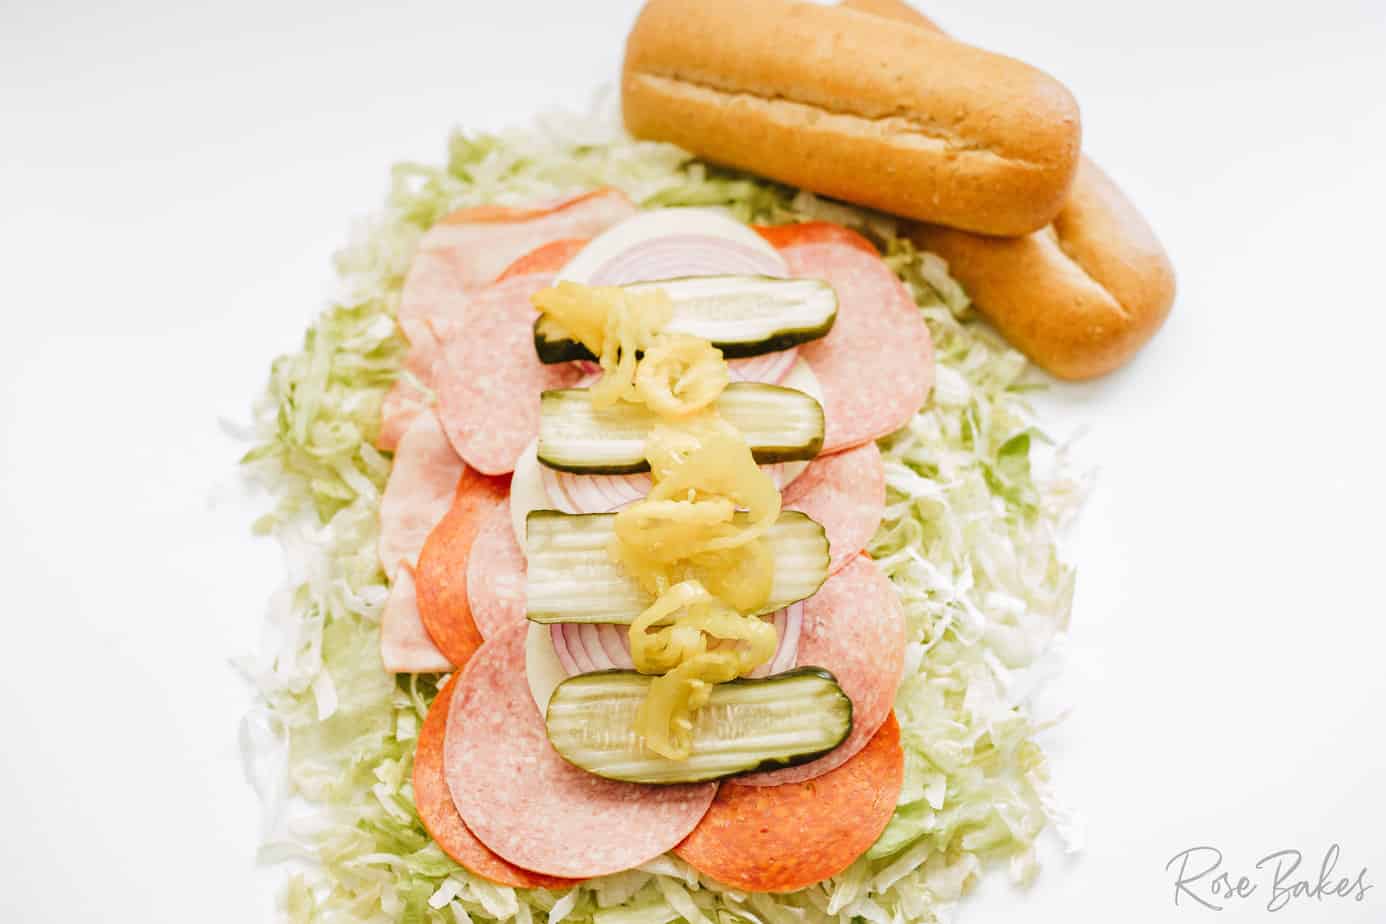 banana pepper rings added on top of the pickles